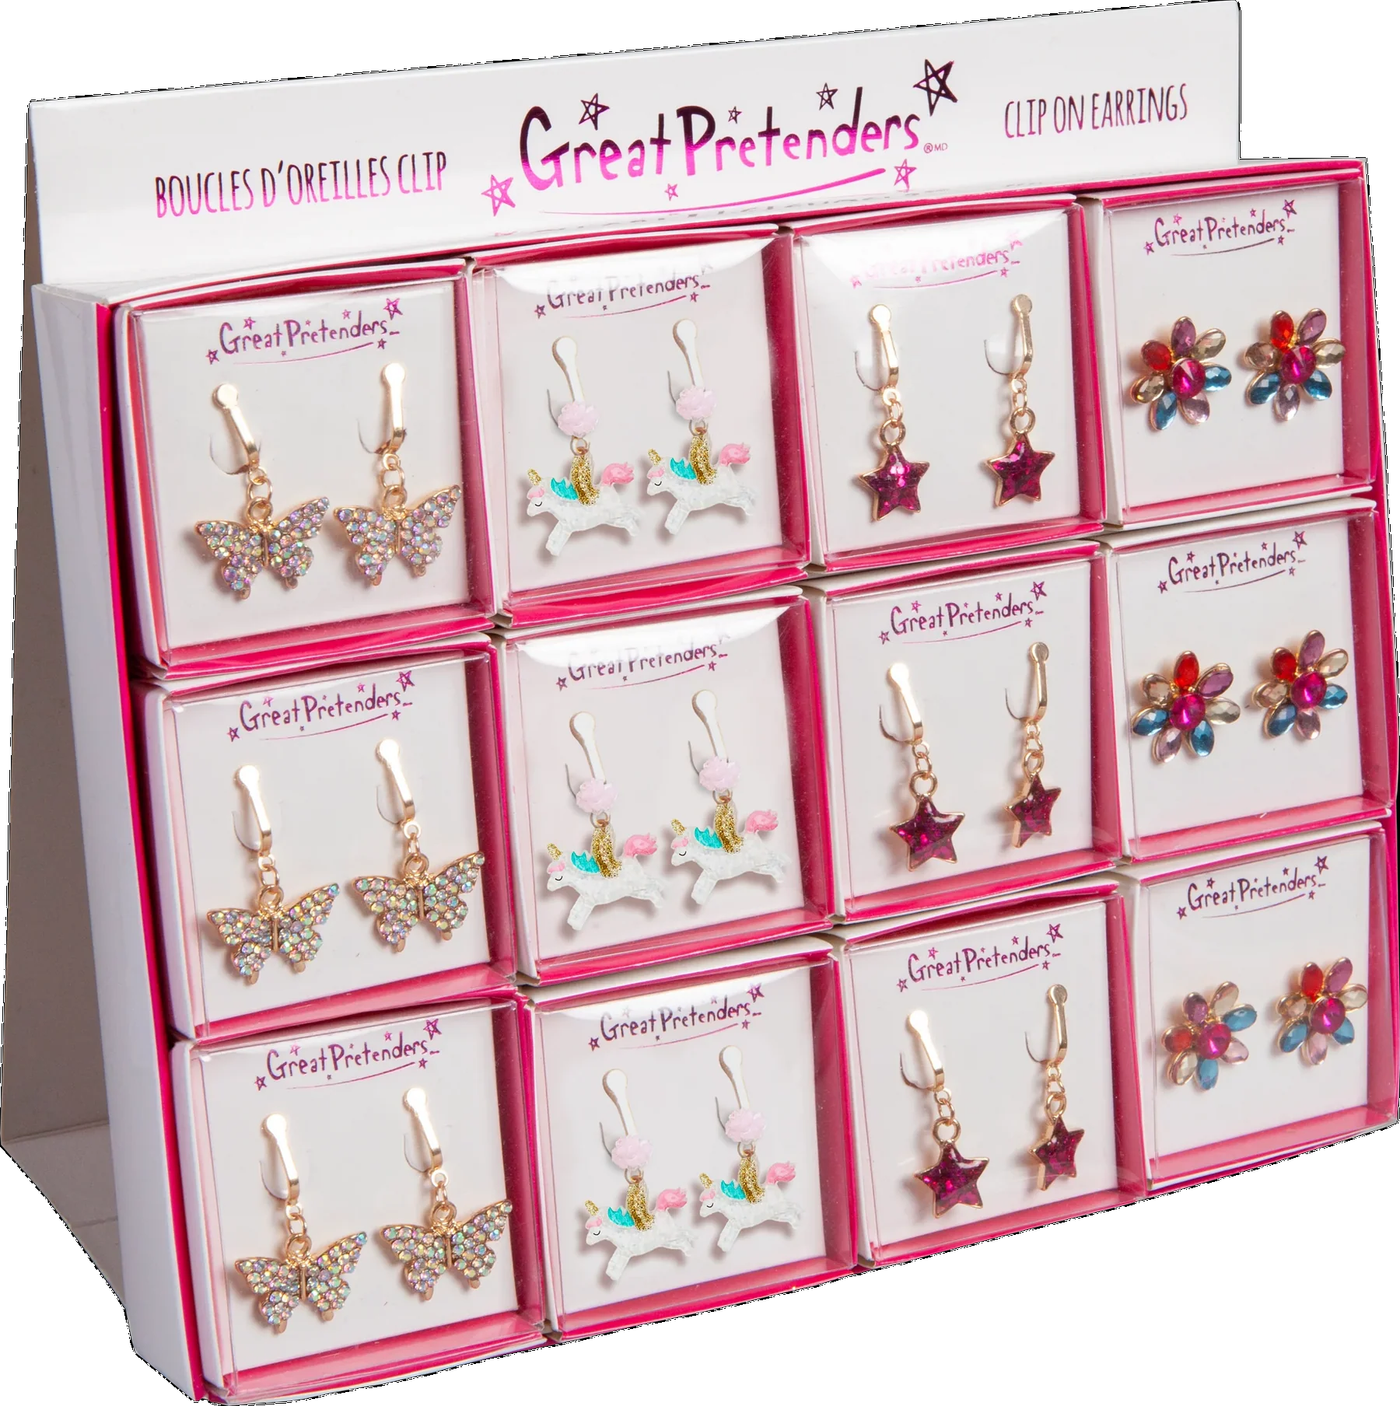 Boxed Clip On Earrings - 4 Styles!